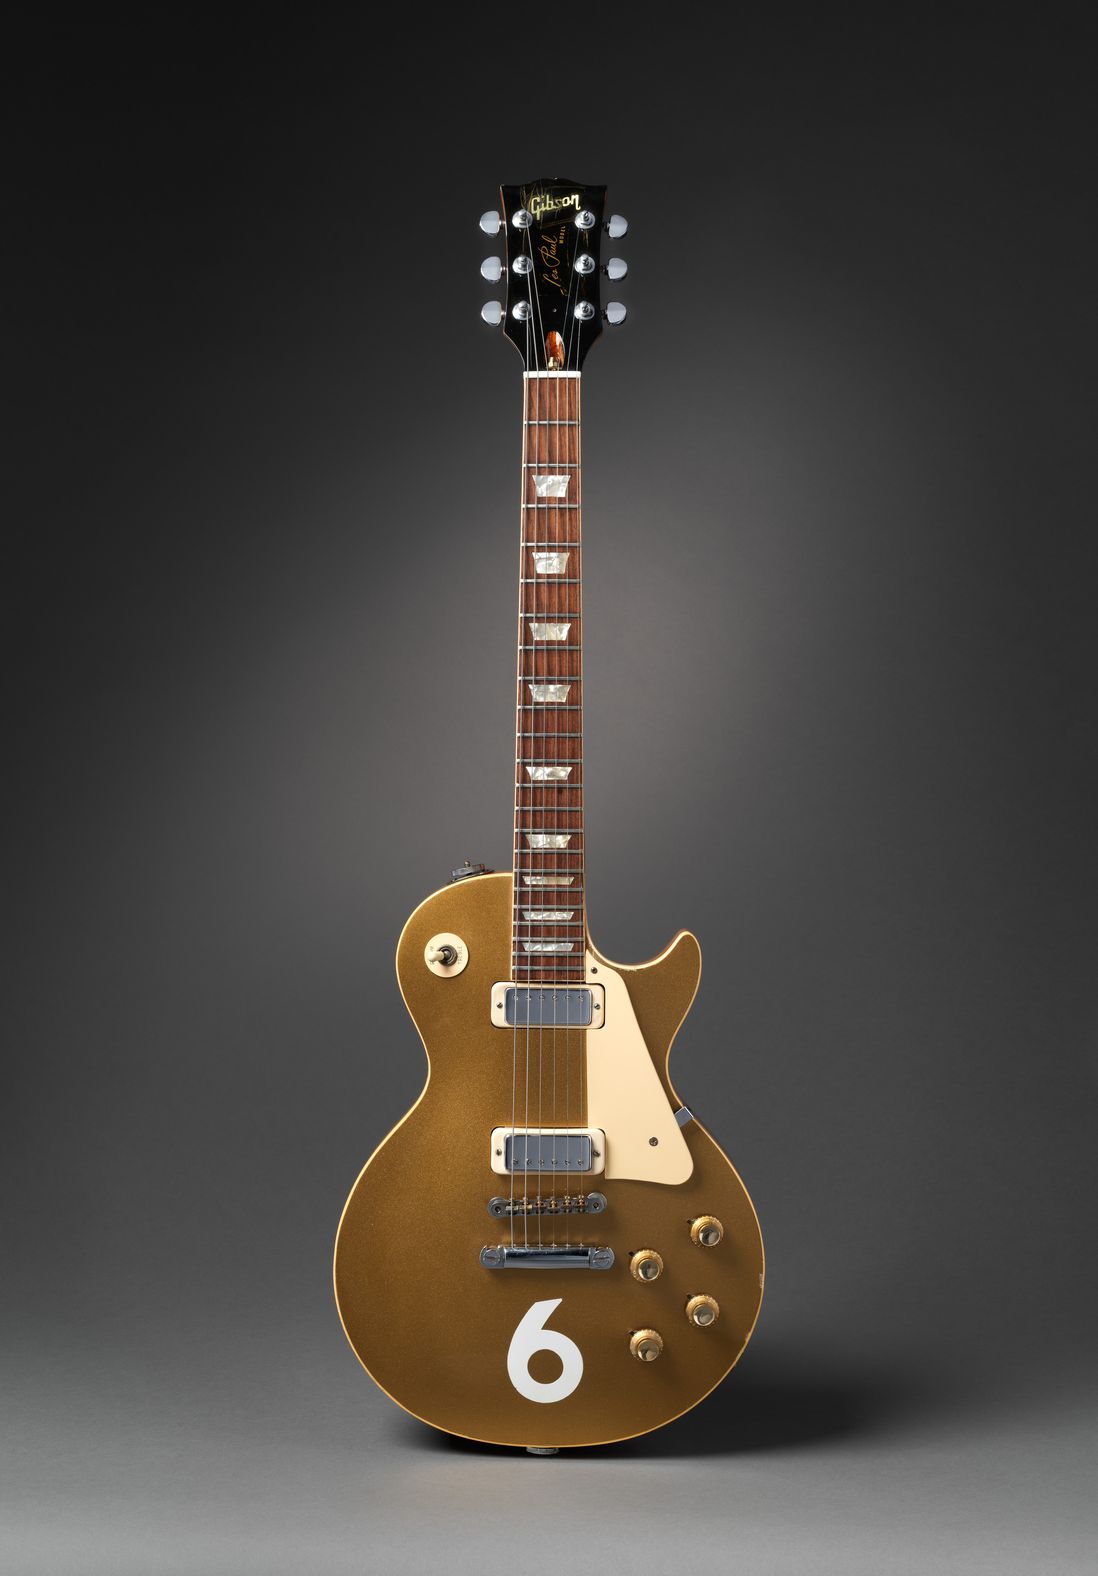 Pete Townsend's "No. 6" Les Paul Deluxe, which he used throughout the 1970s until destroyed after it fell from a second-story window in London’s Hammersmith Odeon in December 1975 (it was restored in 2002).